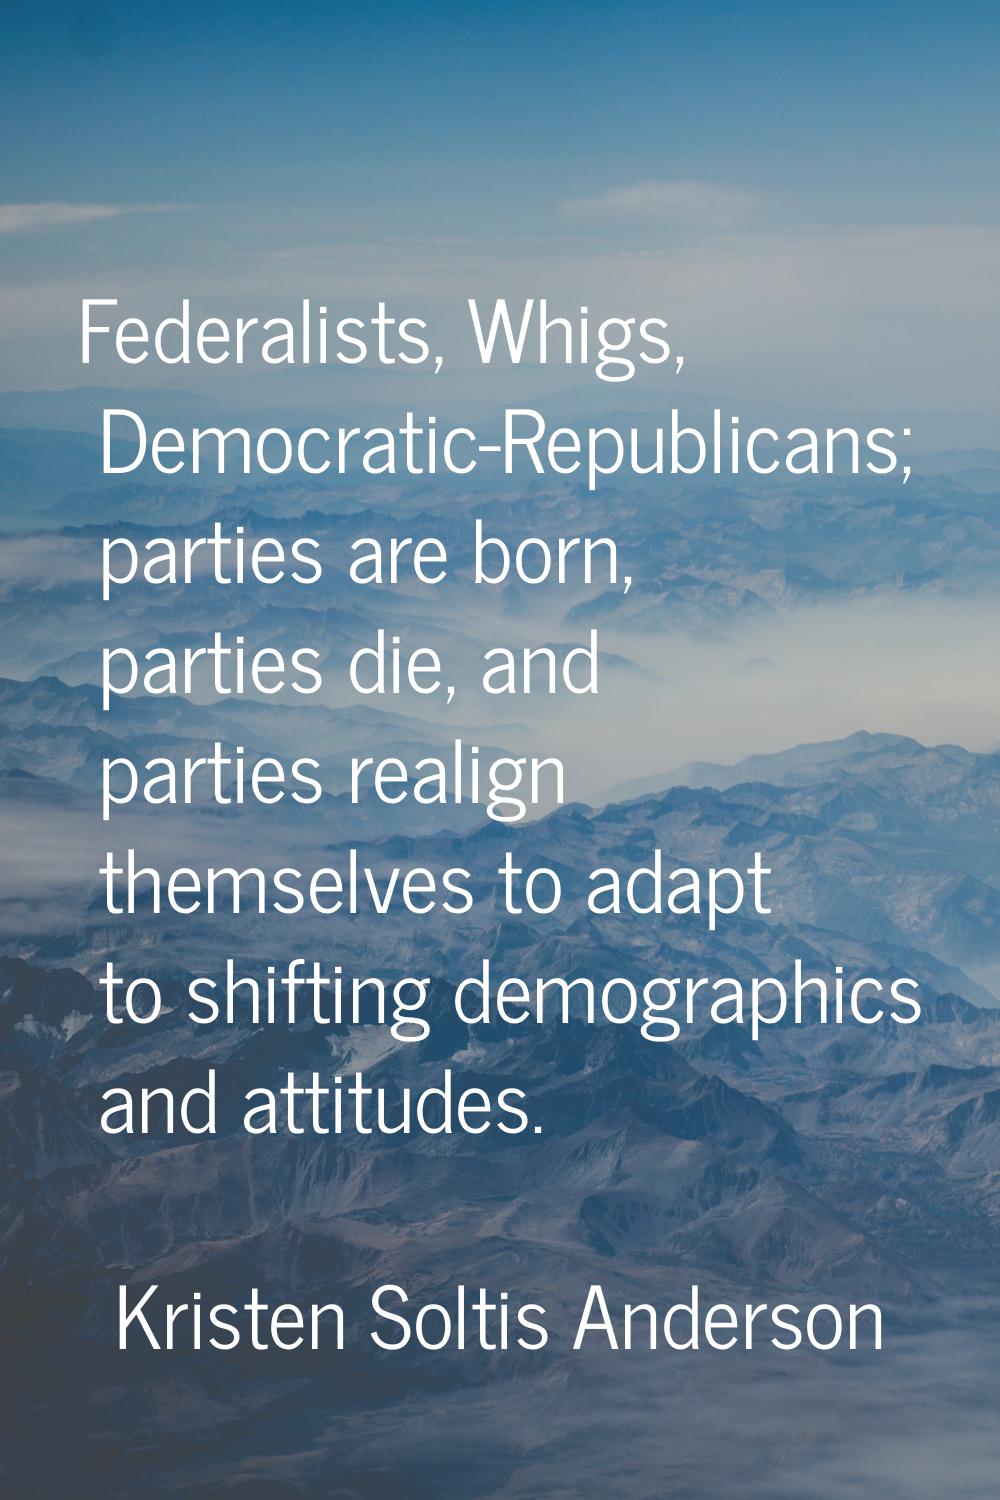 Federalists, Whigs, Democratic-Republicans; parties are born, parties die, and parties realign them